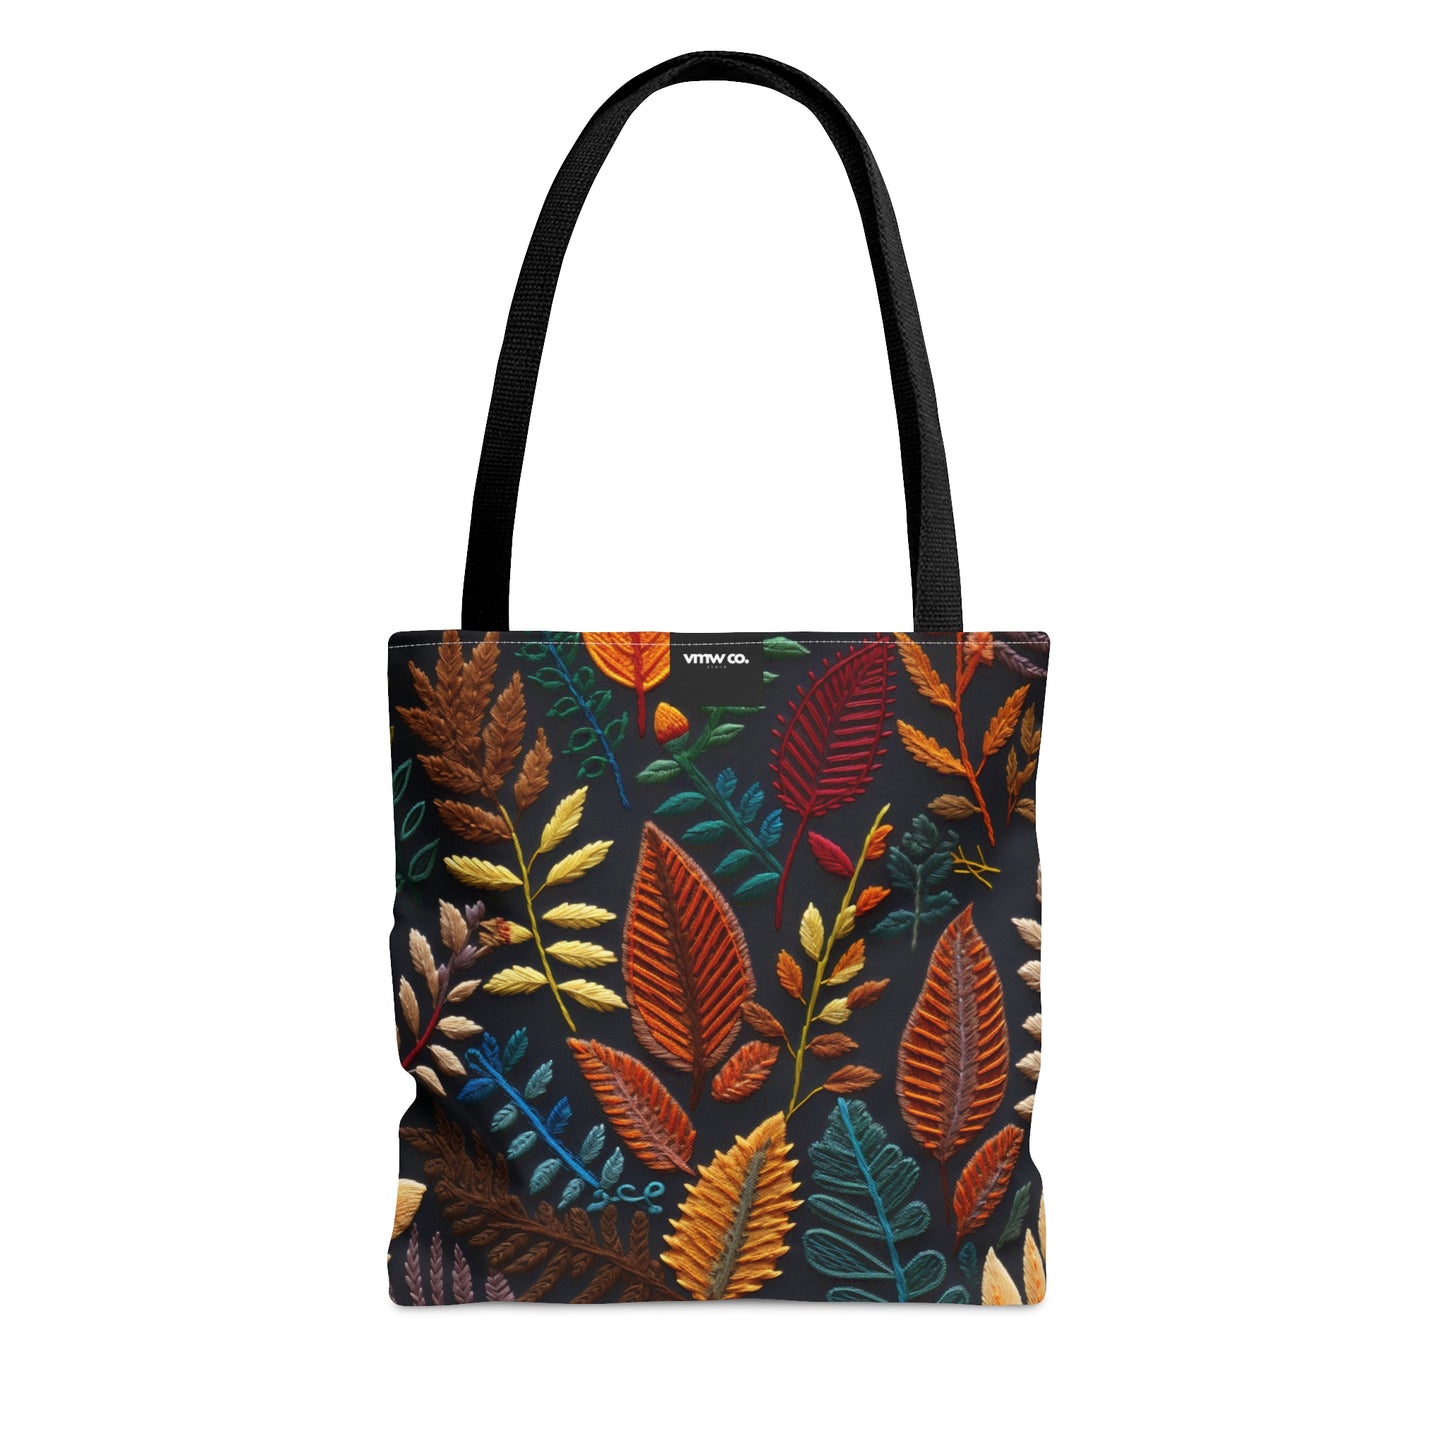 Embroidered Fall Leaves Tote Bag (AOP)